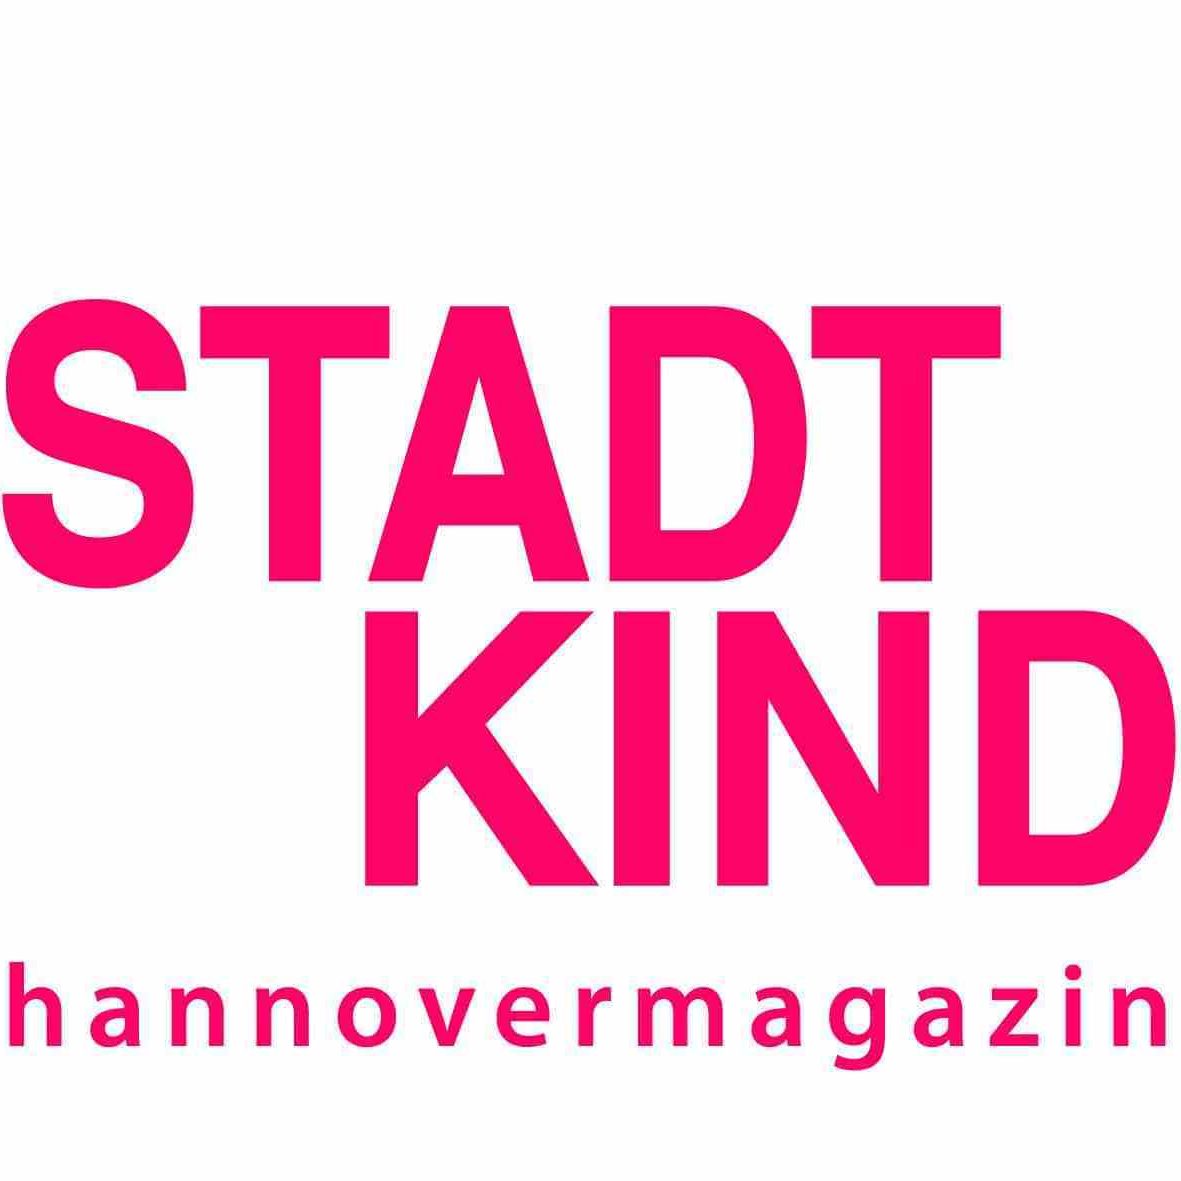 style hannover stadtkind e1593171188304 - test